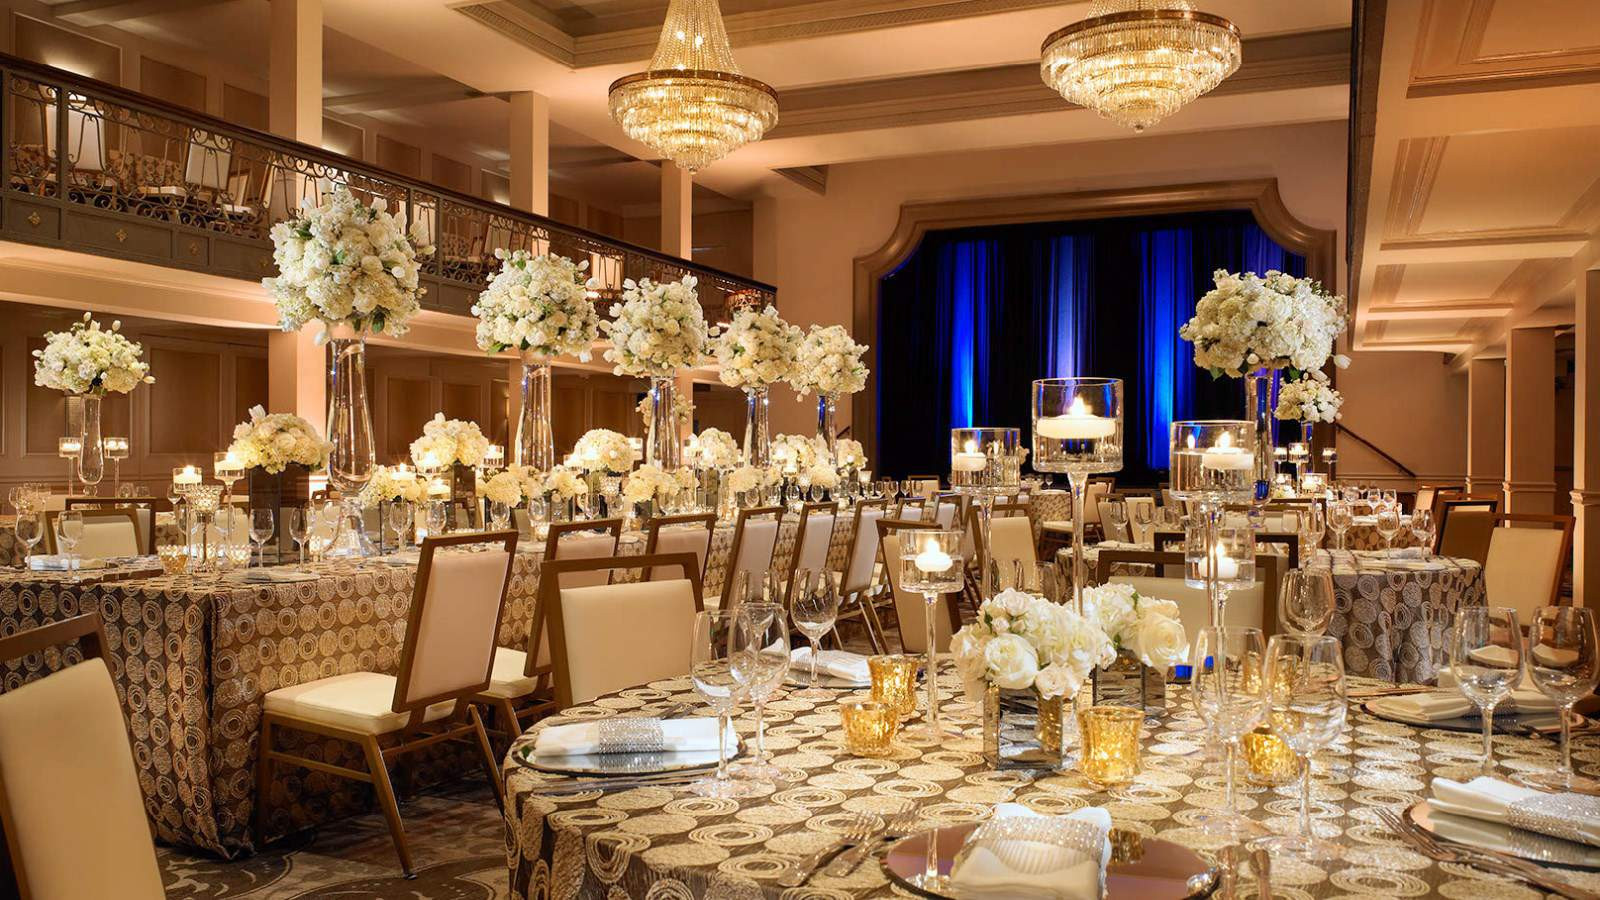 Top Wedding Venues In San Antonio Tx of all time Don t miss out 